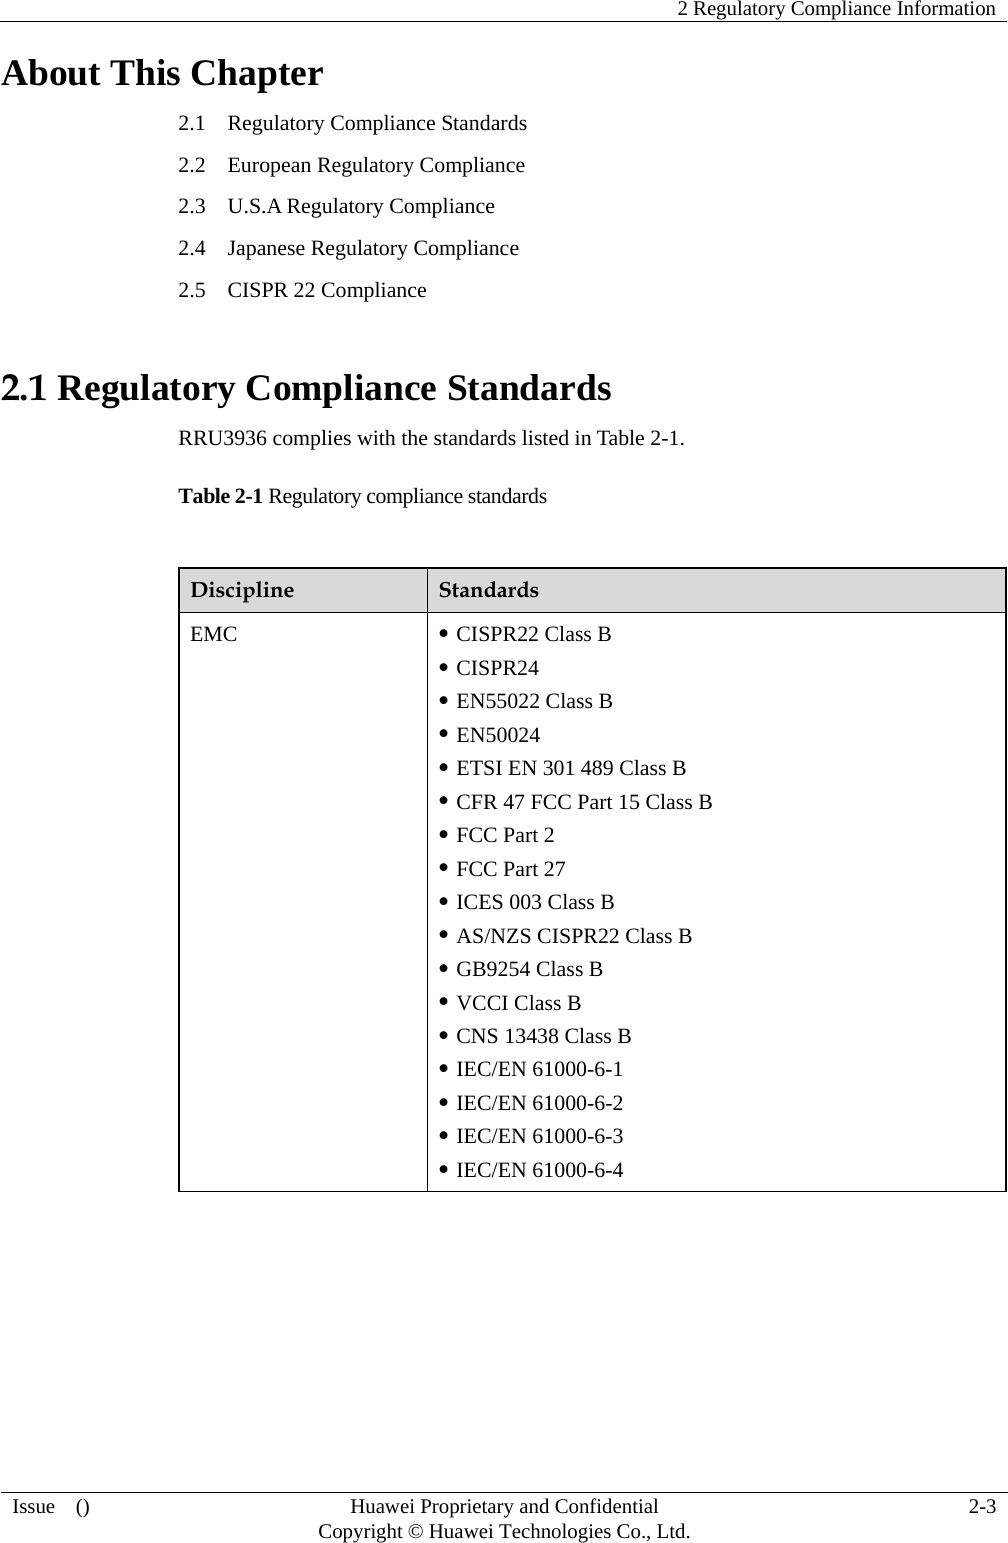    2 Regulatory Compliance Information   Issue  ()  Huawei Proprietary and Confidential     Copyright © Huawei Technologies Co., Ltd.  2-3  About This Chapter 2.1    Regulatory Compliance Standards 2.2  European Regulatory Compliance 2.3  U.S.A Regulatory Compliance 2.4  Japanese Regulatory Compliance 2.5    CISPR 22 Compliance 2.1 Regulatory Compliance Standards RRU3936 complies with the standards listed in Table 2-1. Table 2-1 Regulatory compliance standards  Discipline  Standards EMC   CISPR22 Class B  CISPR24  EN55022 Class B  EN50024  ETSI EN 301 489 Class B  CFR 47 FCC Part 15 Class B  FCC Part 2  FCC Part 27  ICES 003 Class B  AS/NZS CISPR22 Class B  GB9254 Class B  VCCI Class B  CNS 13438 Class B  IEC/EN 61000-6-1  IEC/EN 61000-6-2  IEC/EN 61000-6-3  IEC/EN 61000-6-4 